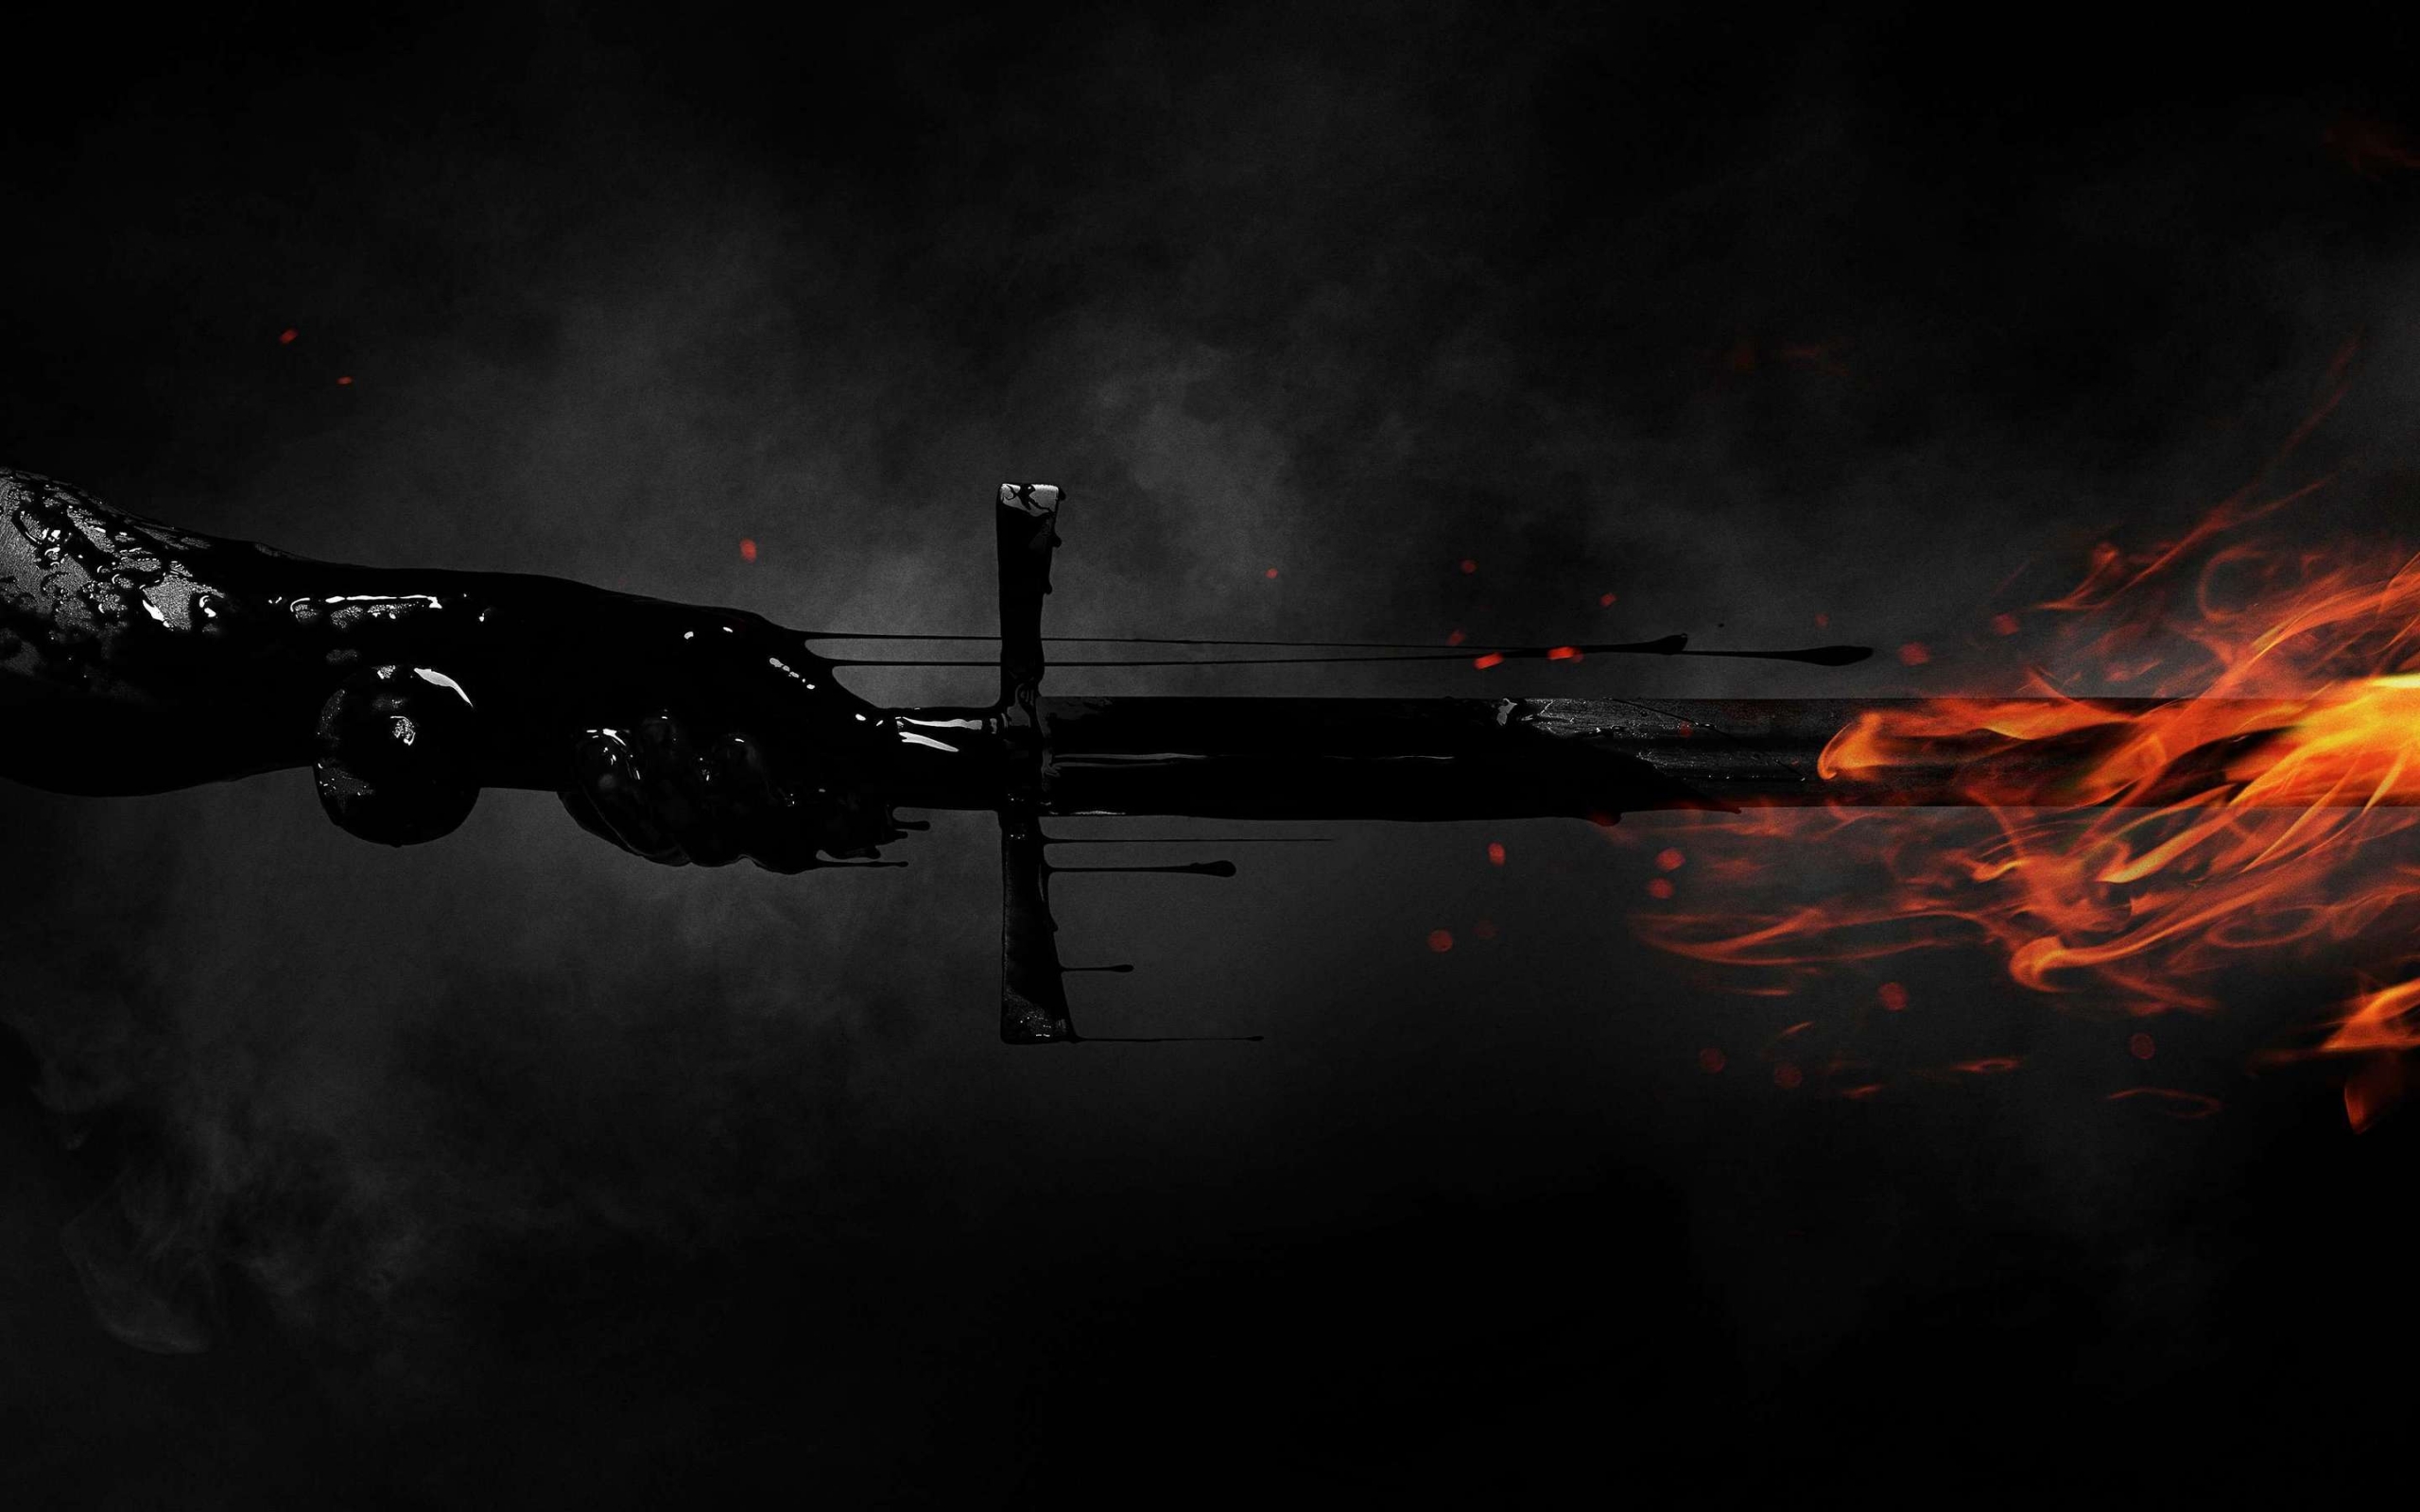 The Last Witch Hunter Sword for 2560 x 1600 widescreen resolution